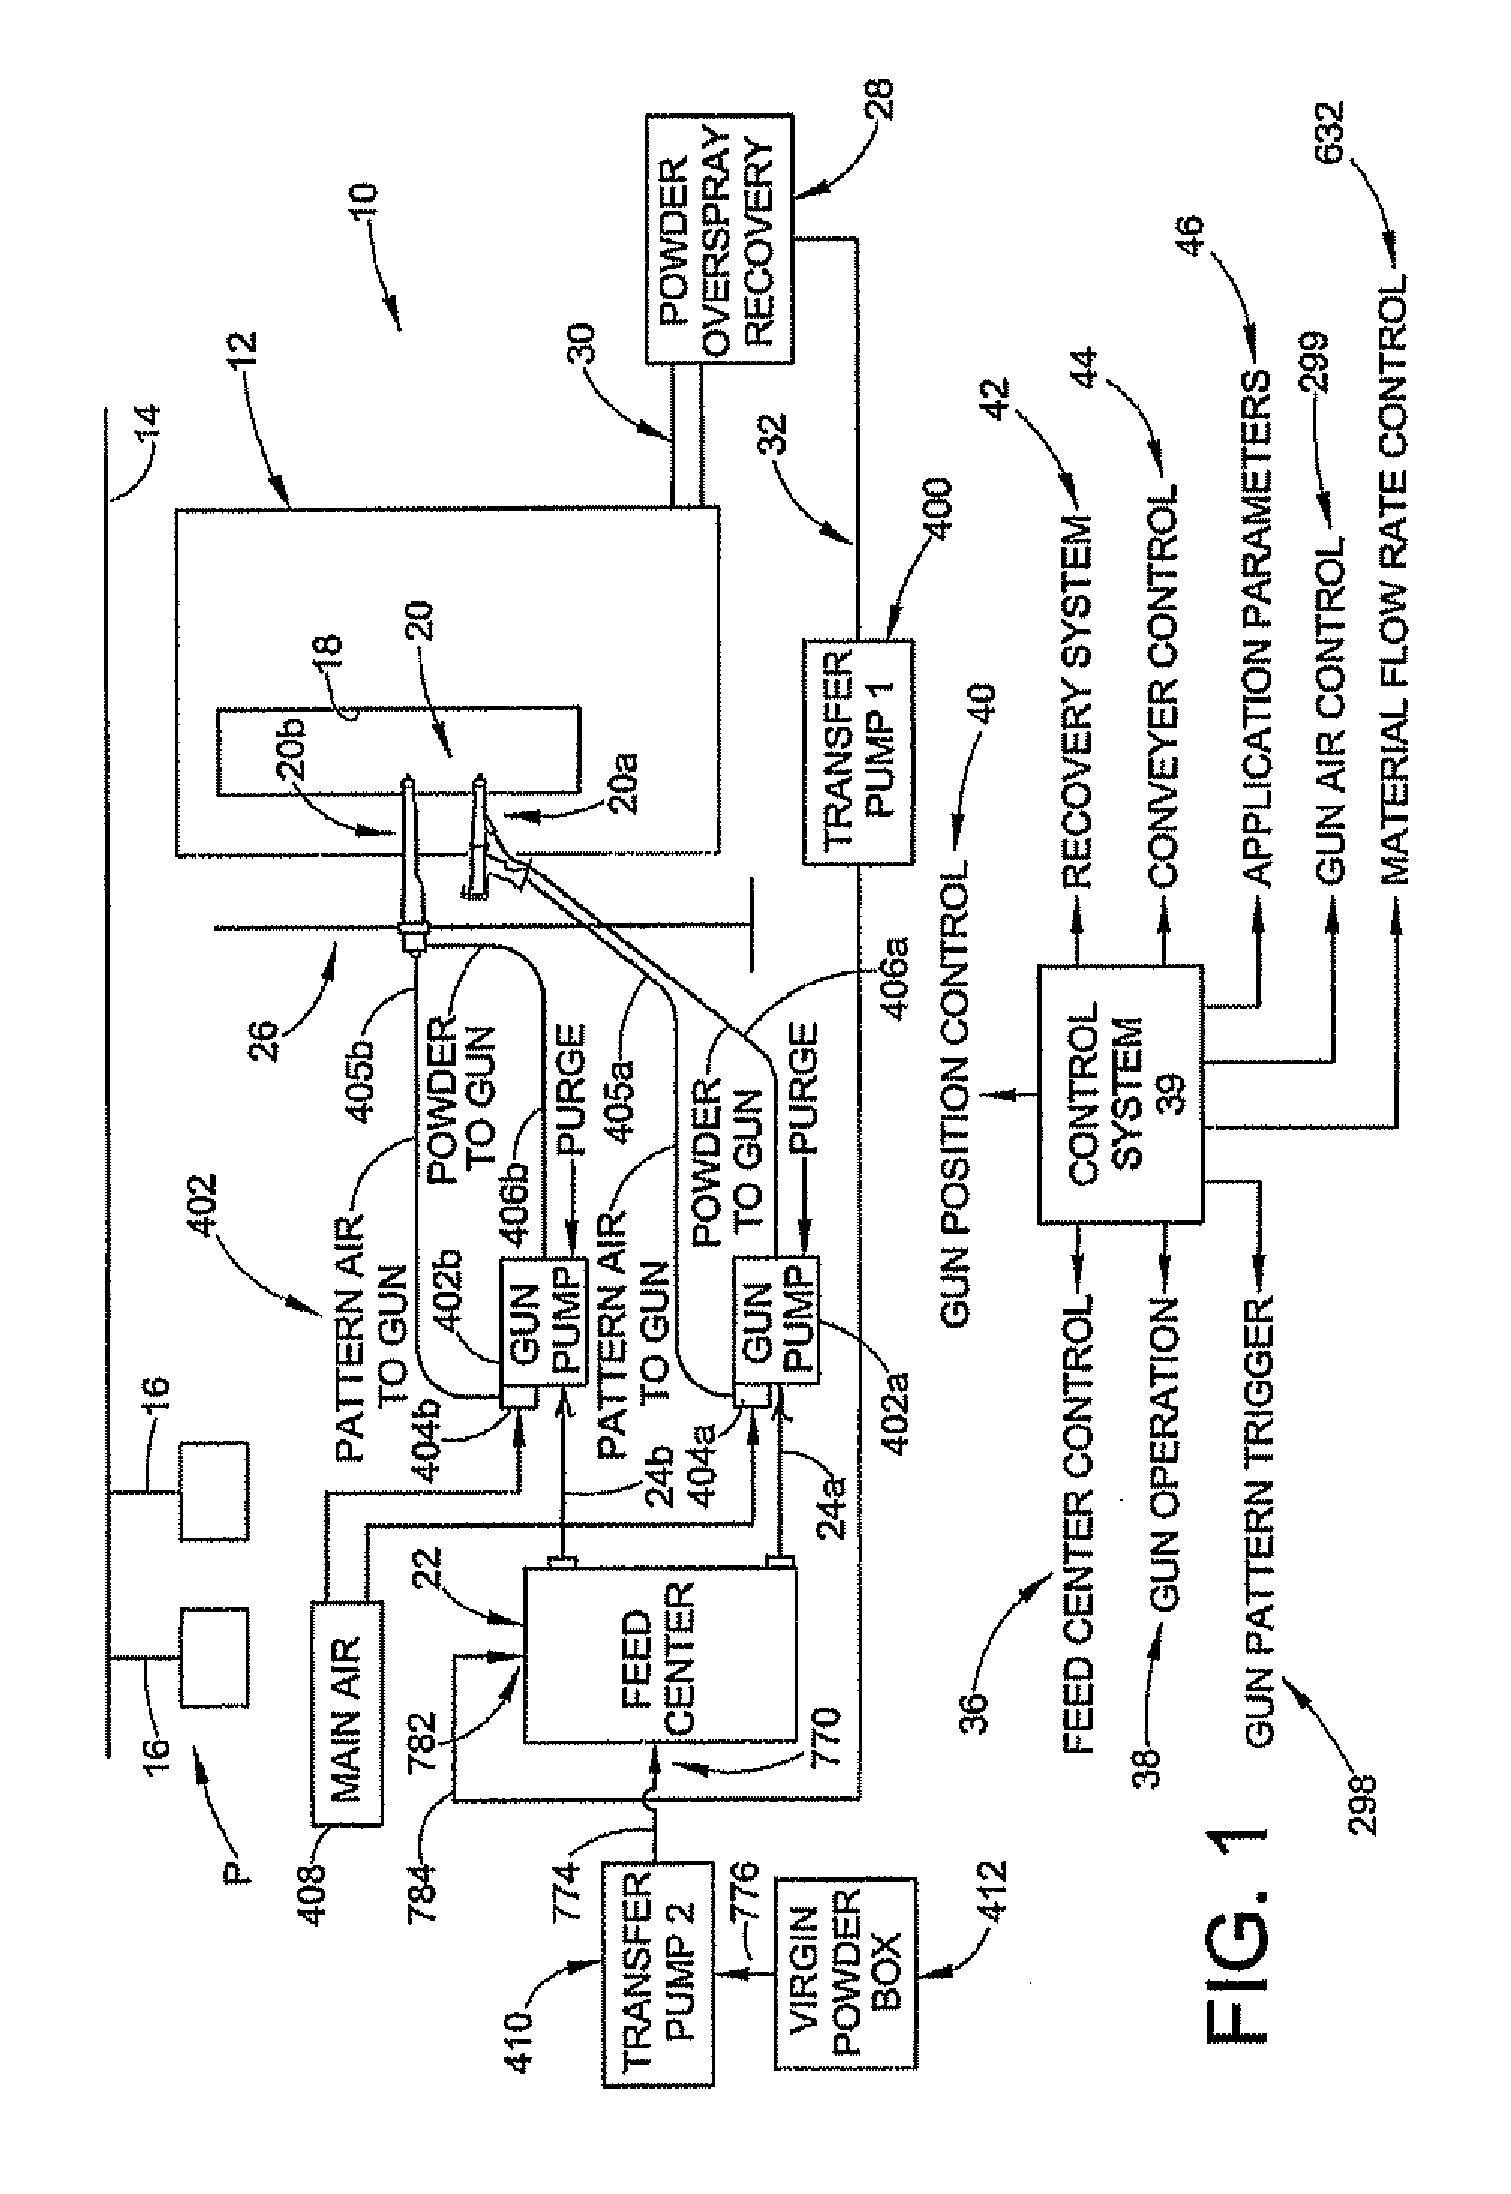 Dense phase pump with open loop control